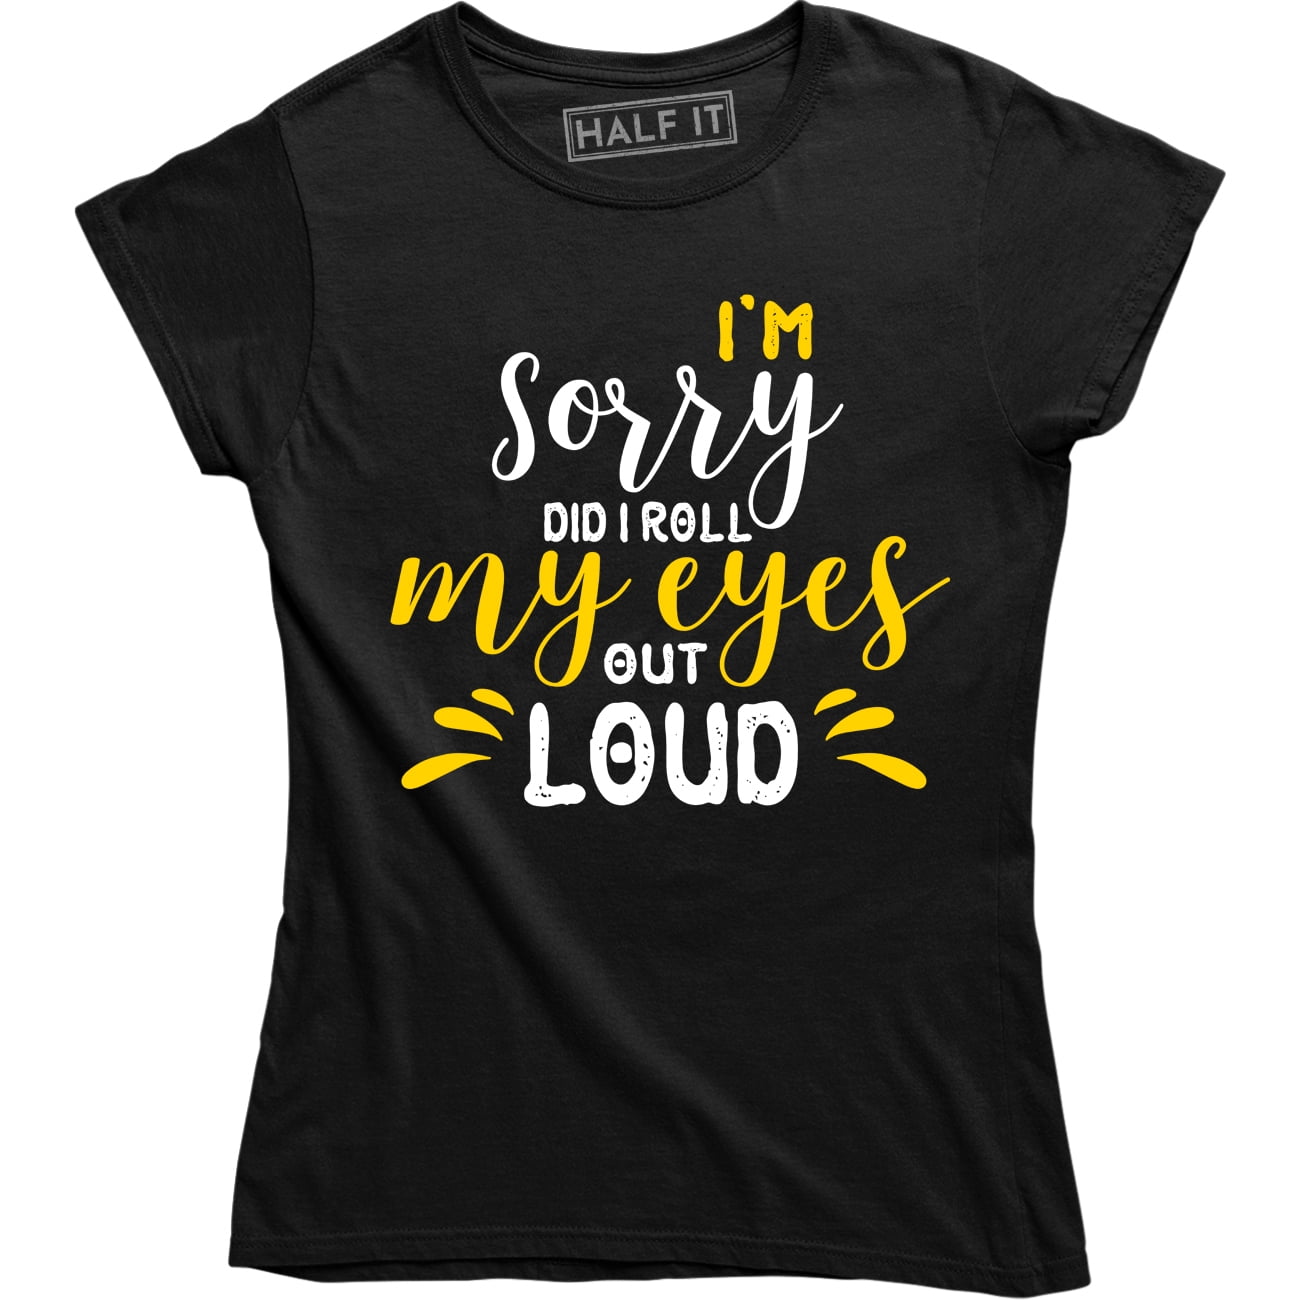 SORRY I'M LATE CROP TOP T SHIRT WOMENS FUNNY HIPSTER SLOGAN LADIES CUTE HAPPY